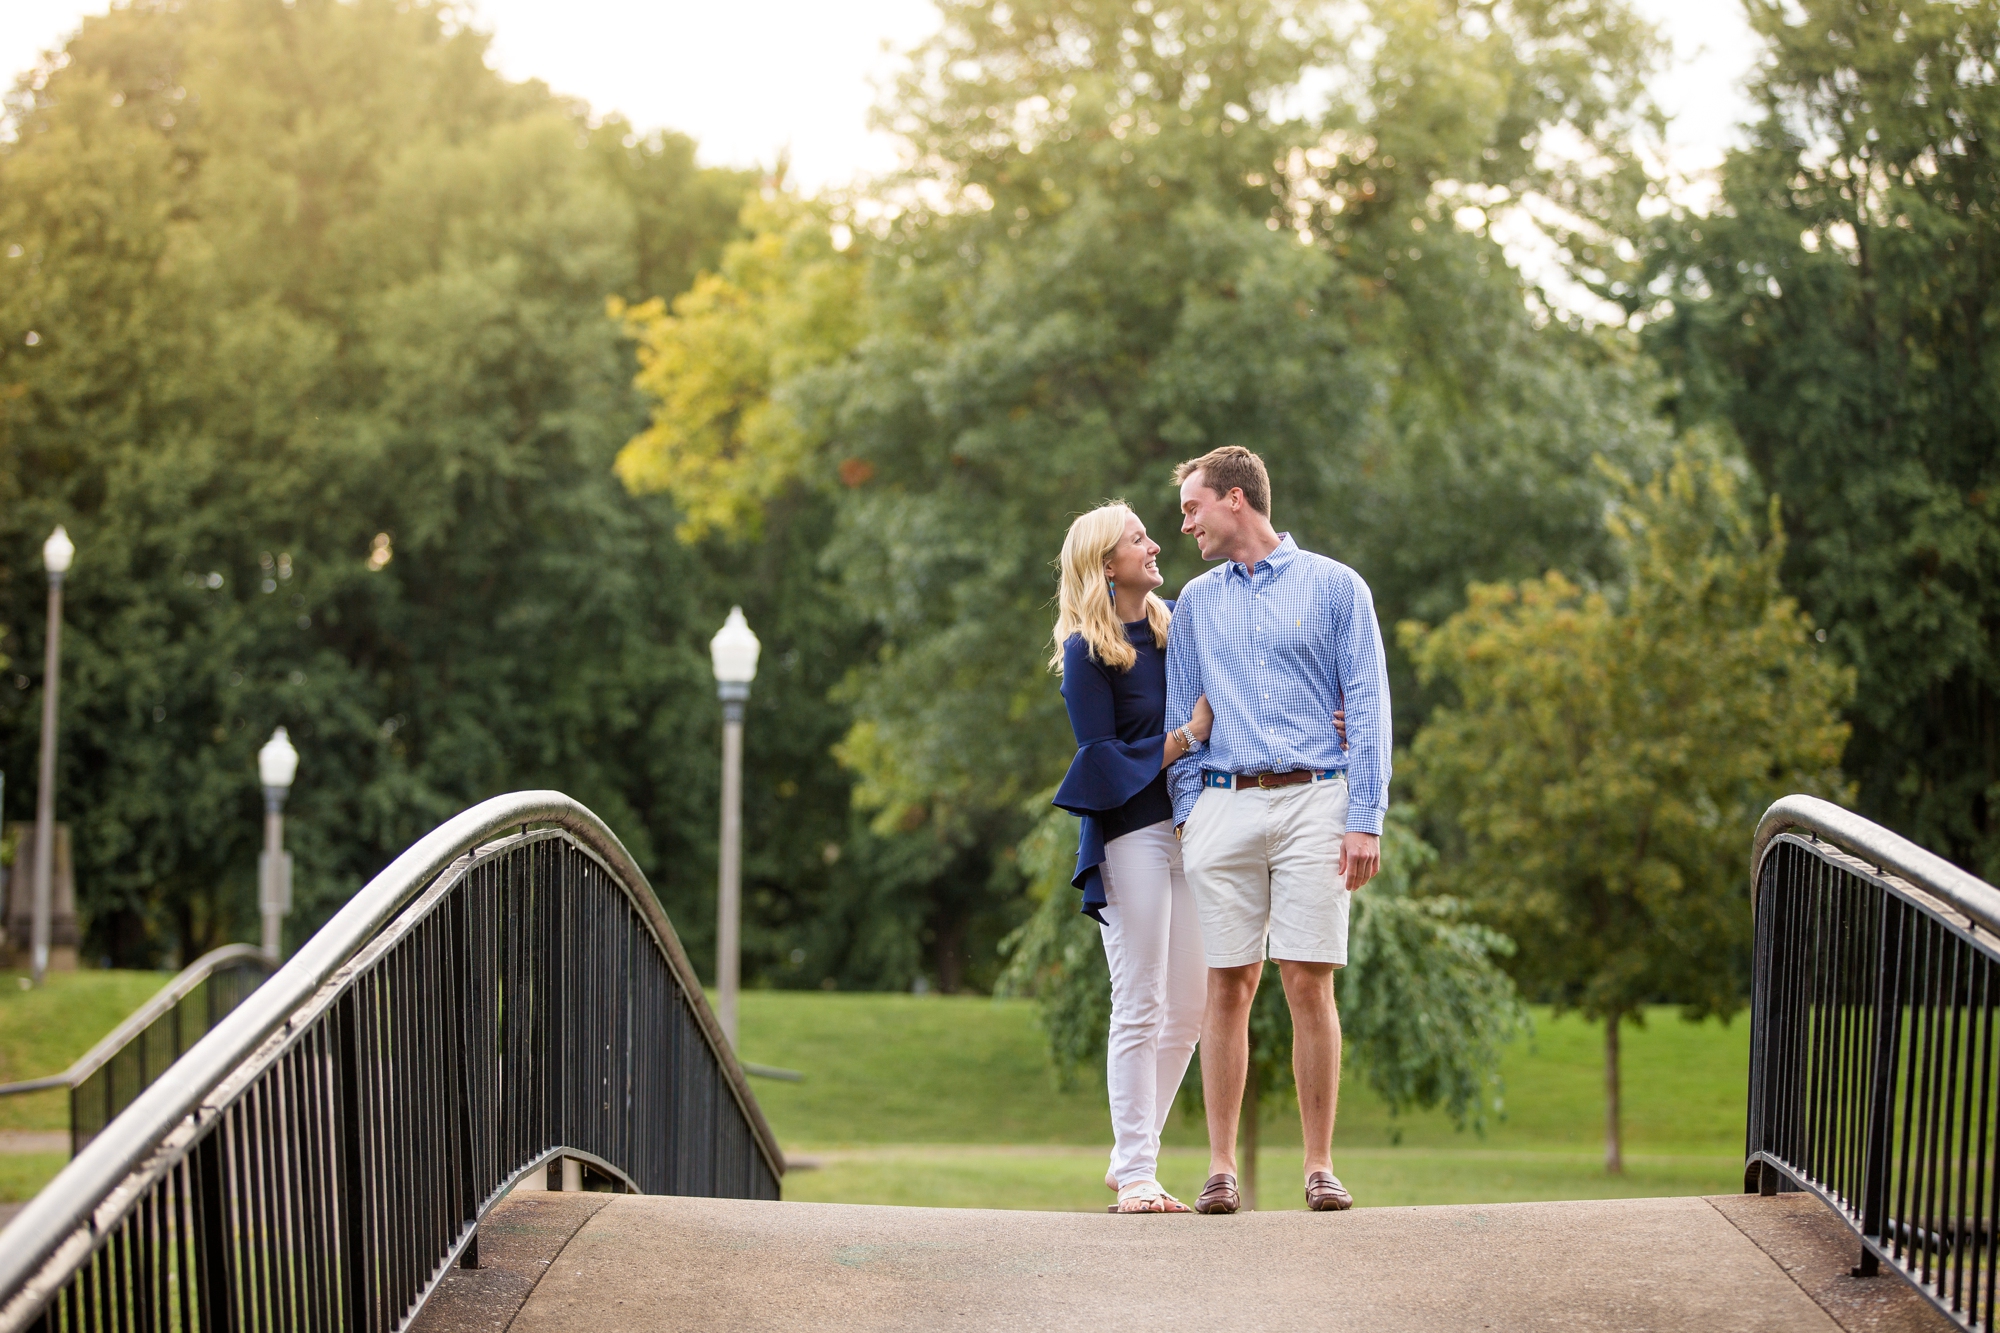 north shore engagement photos, north side engagement photos, allegheny commons park engagement photos, roberto clemente bridge engagement photos